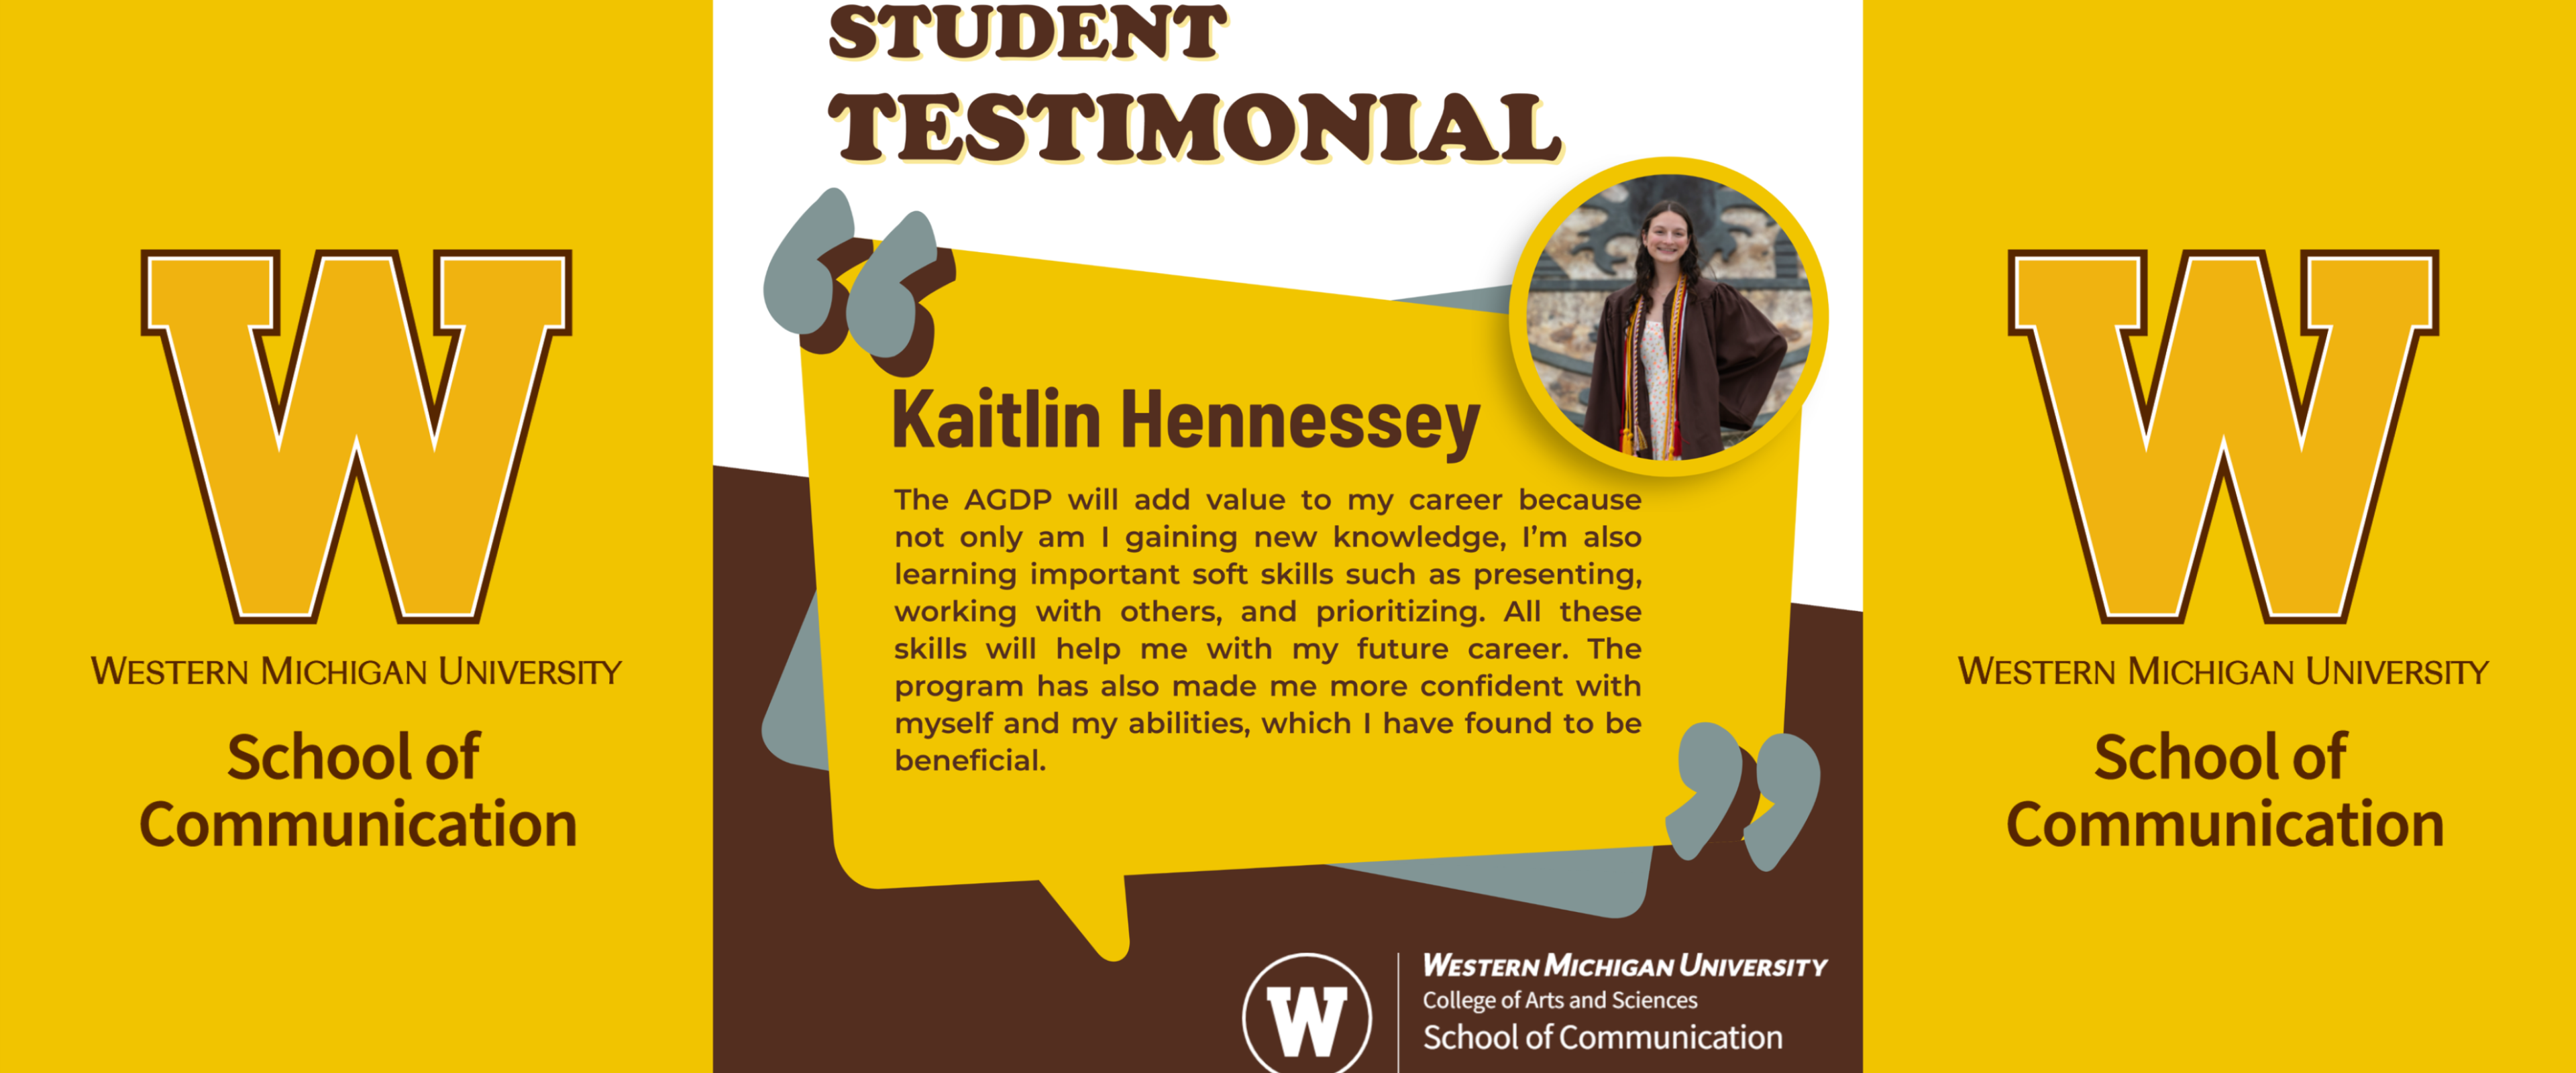 Student Testimonial of Kaitlin Hennessey: The AGDP will add value to my career because not only am I gaining new knowledge, I'm also learning important soft skills such as presenting, working with others, and prioritizing. All these skills will help me with my future career. The program has also made me more confident with myself and my abilities, which I have found to be beneficial.